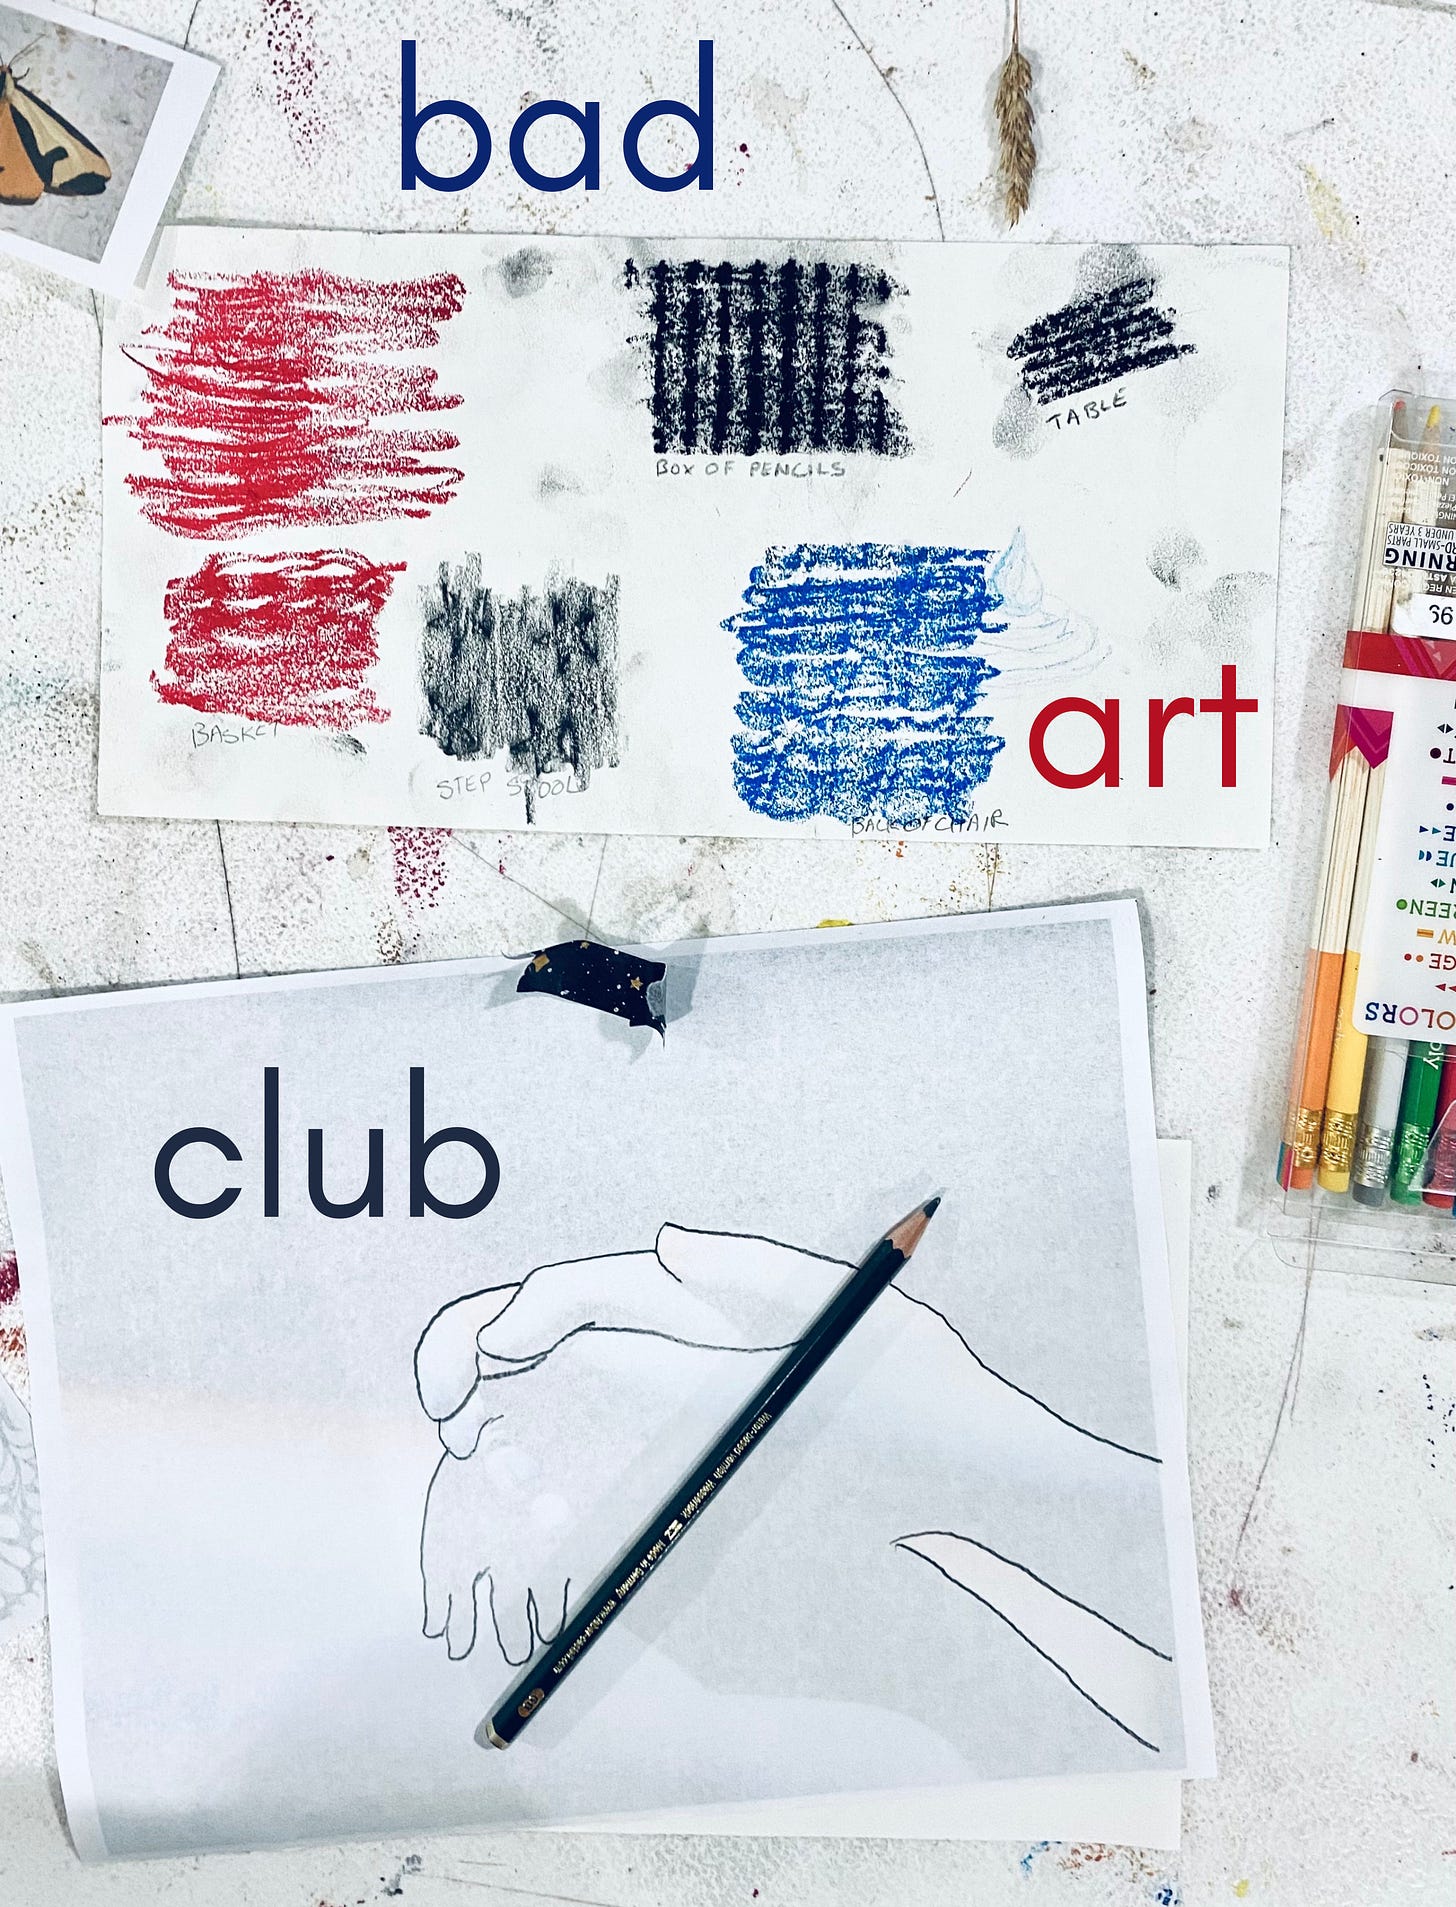 A art table covered in art materials incluidng color pencils, the start of a drawing of two hands, an image of a moth, and a piece of paper with red, blue, and black rubbings on them. "bad art club" is written on top of the image in red, blue, and grey.